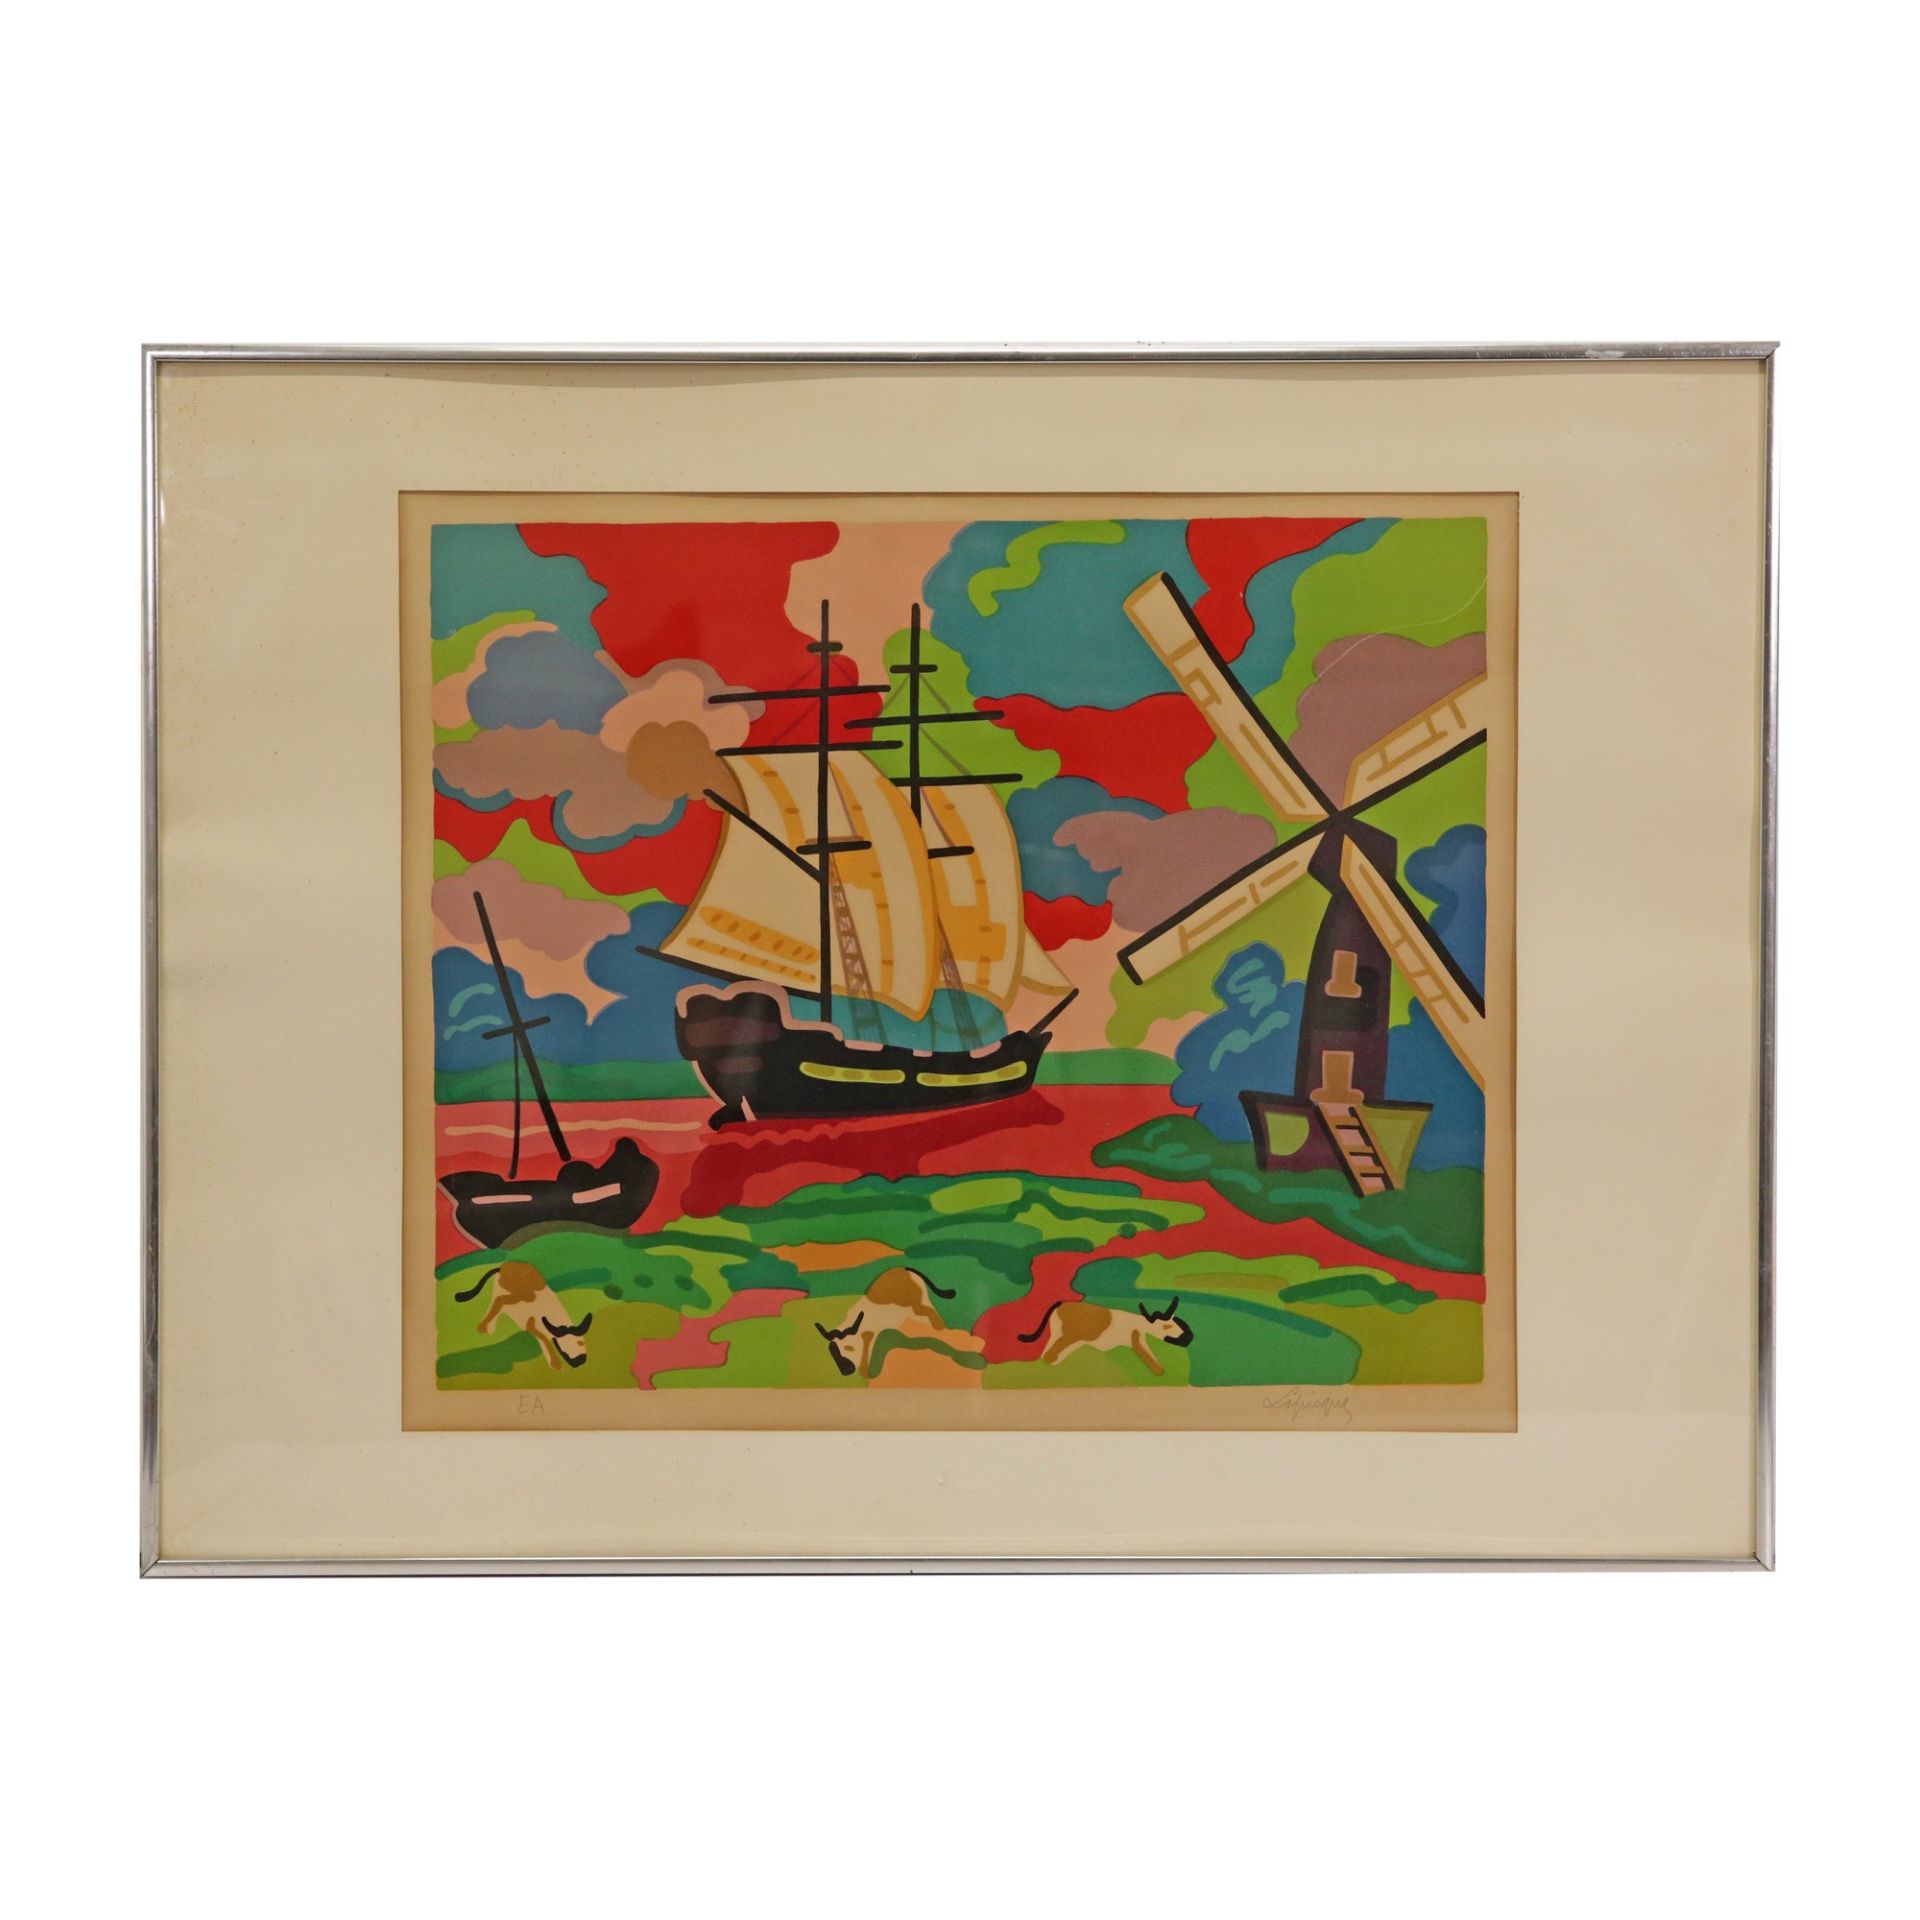 Charles Lapicque (1898 - 1988) "Mill by the sea" Lithograph, 20th century French painting.